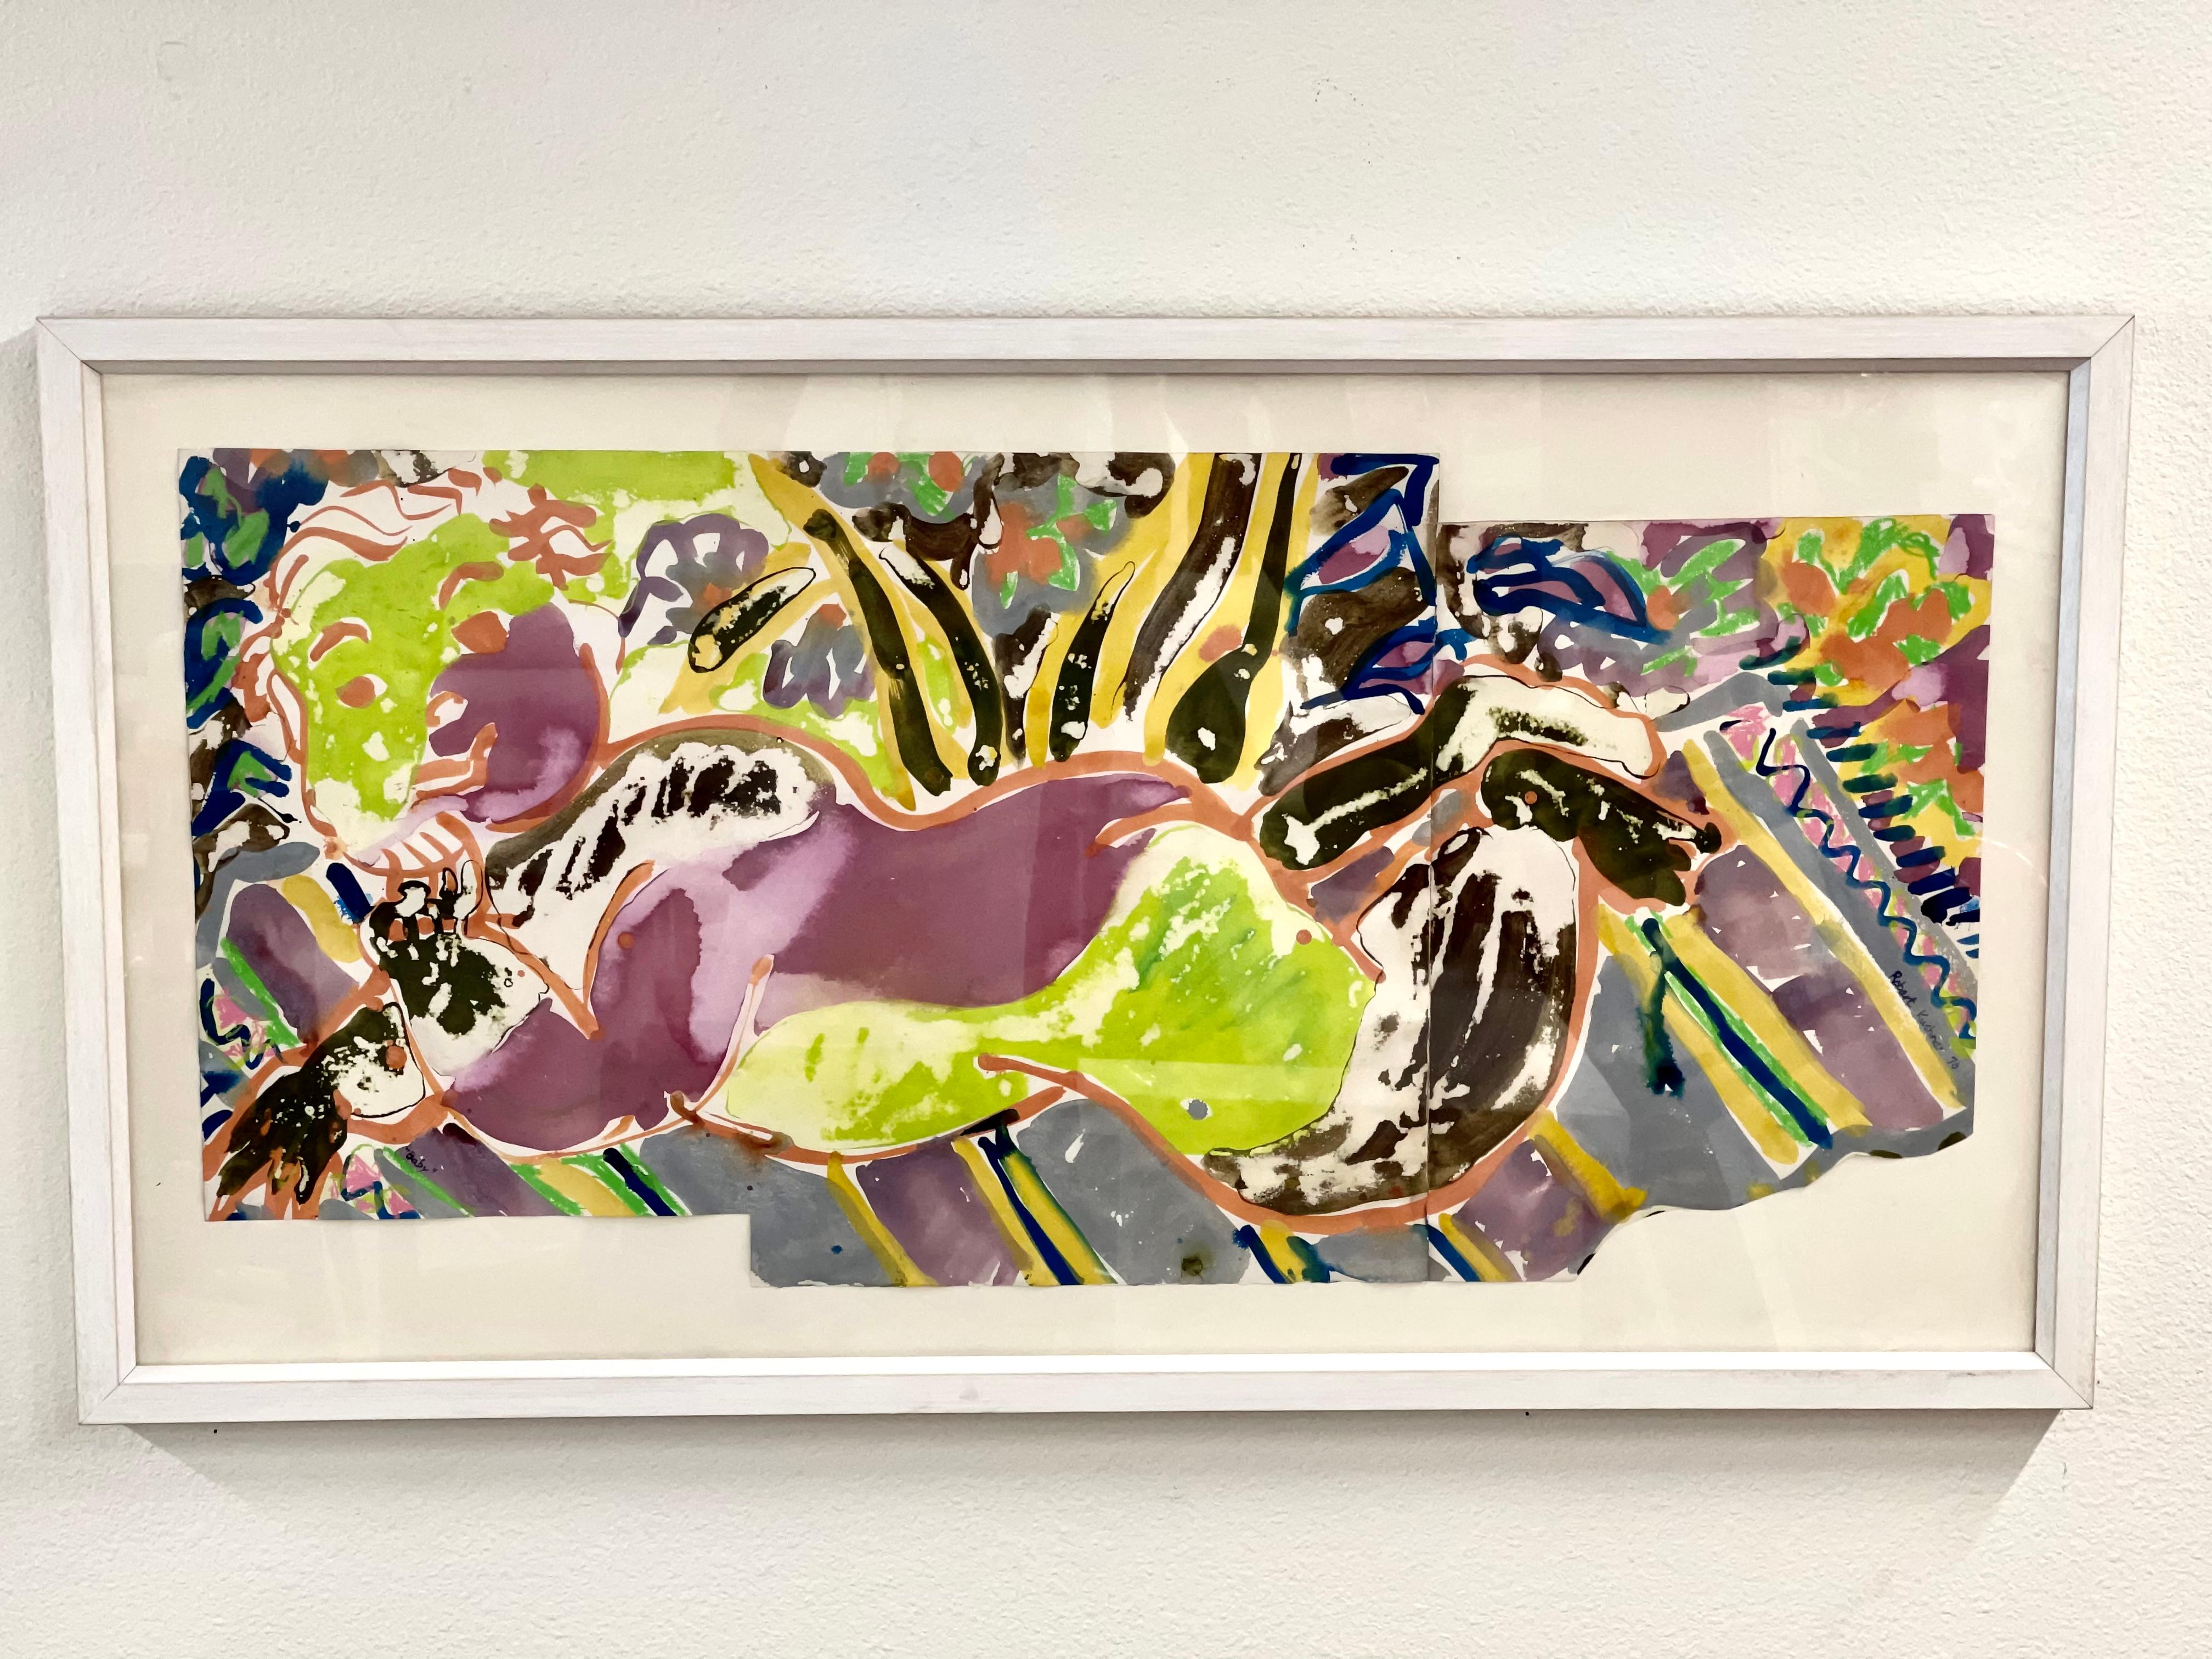 Watercolor on paper by the noted artist Robert Kushner. It is on 3 pieces of paper affixed to a board backing. Signed and dated 1978 lower right and titled 